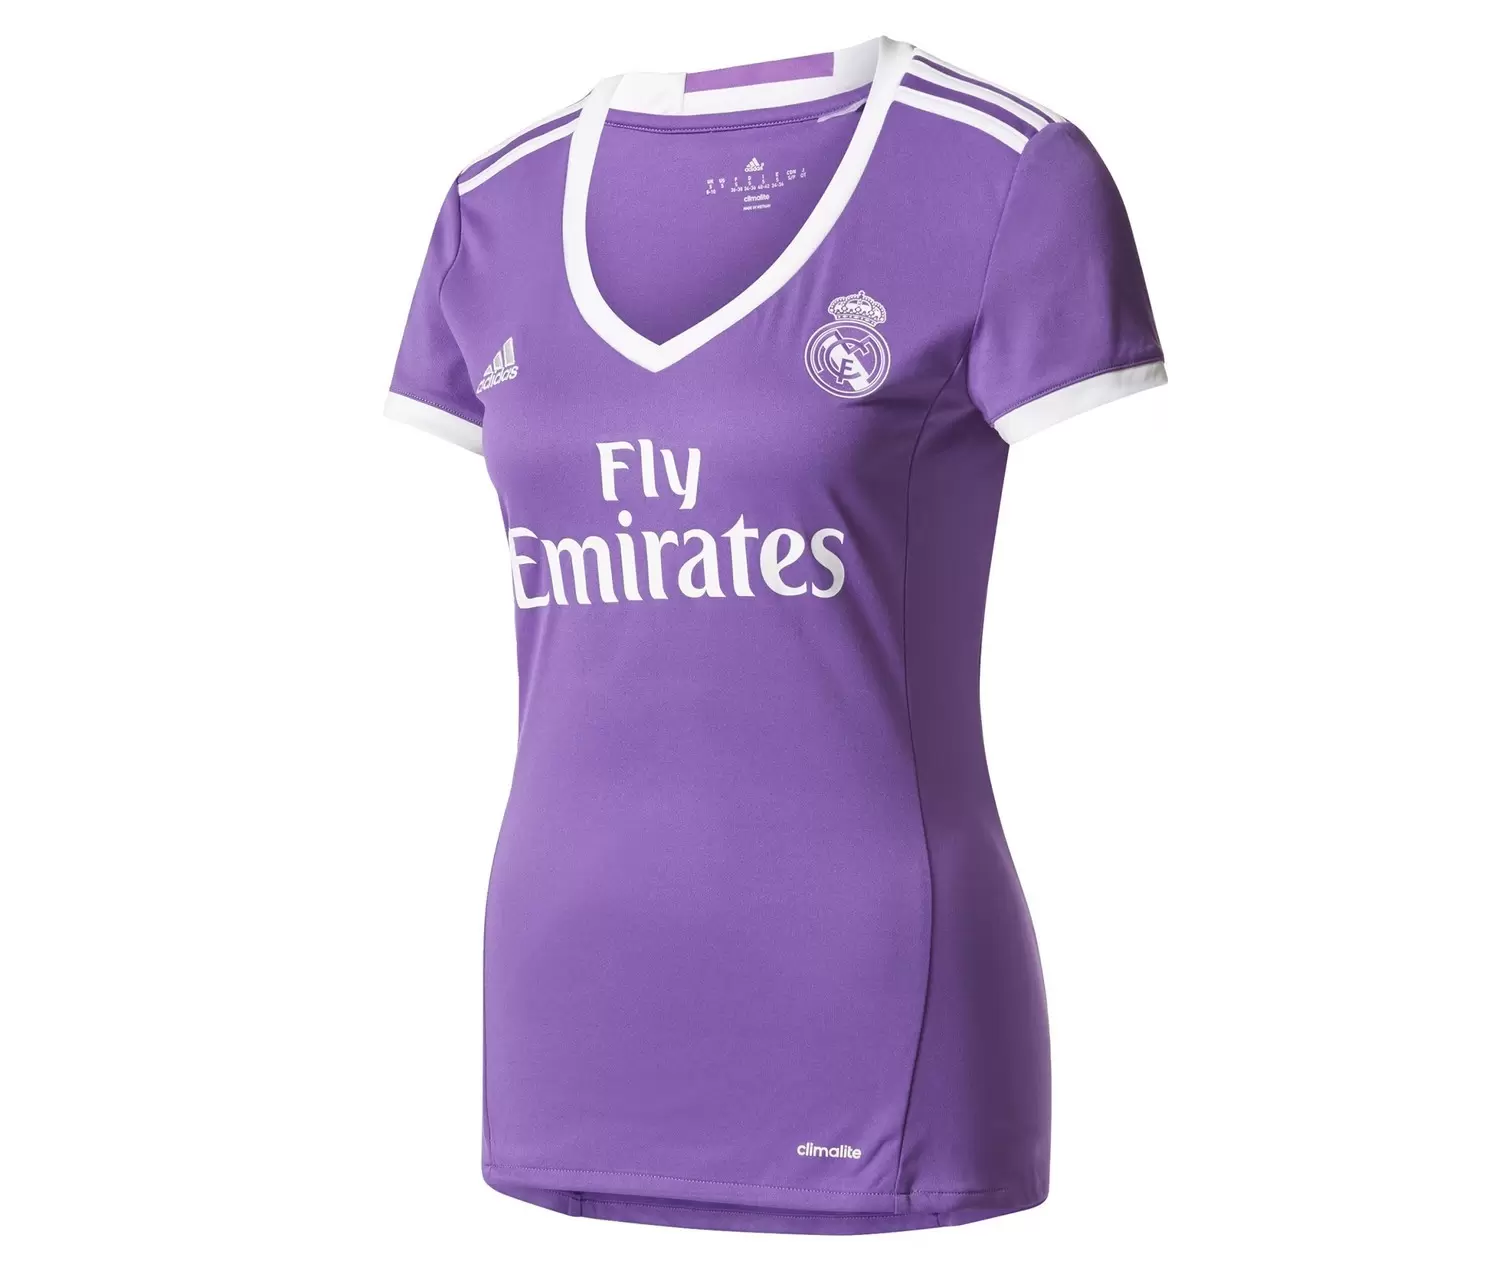 Maillot de football - Supportrice Real Madrid Extérieur 2016/2017 Femme